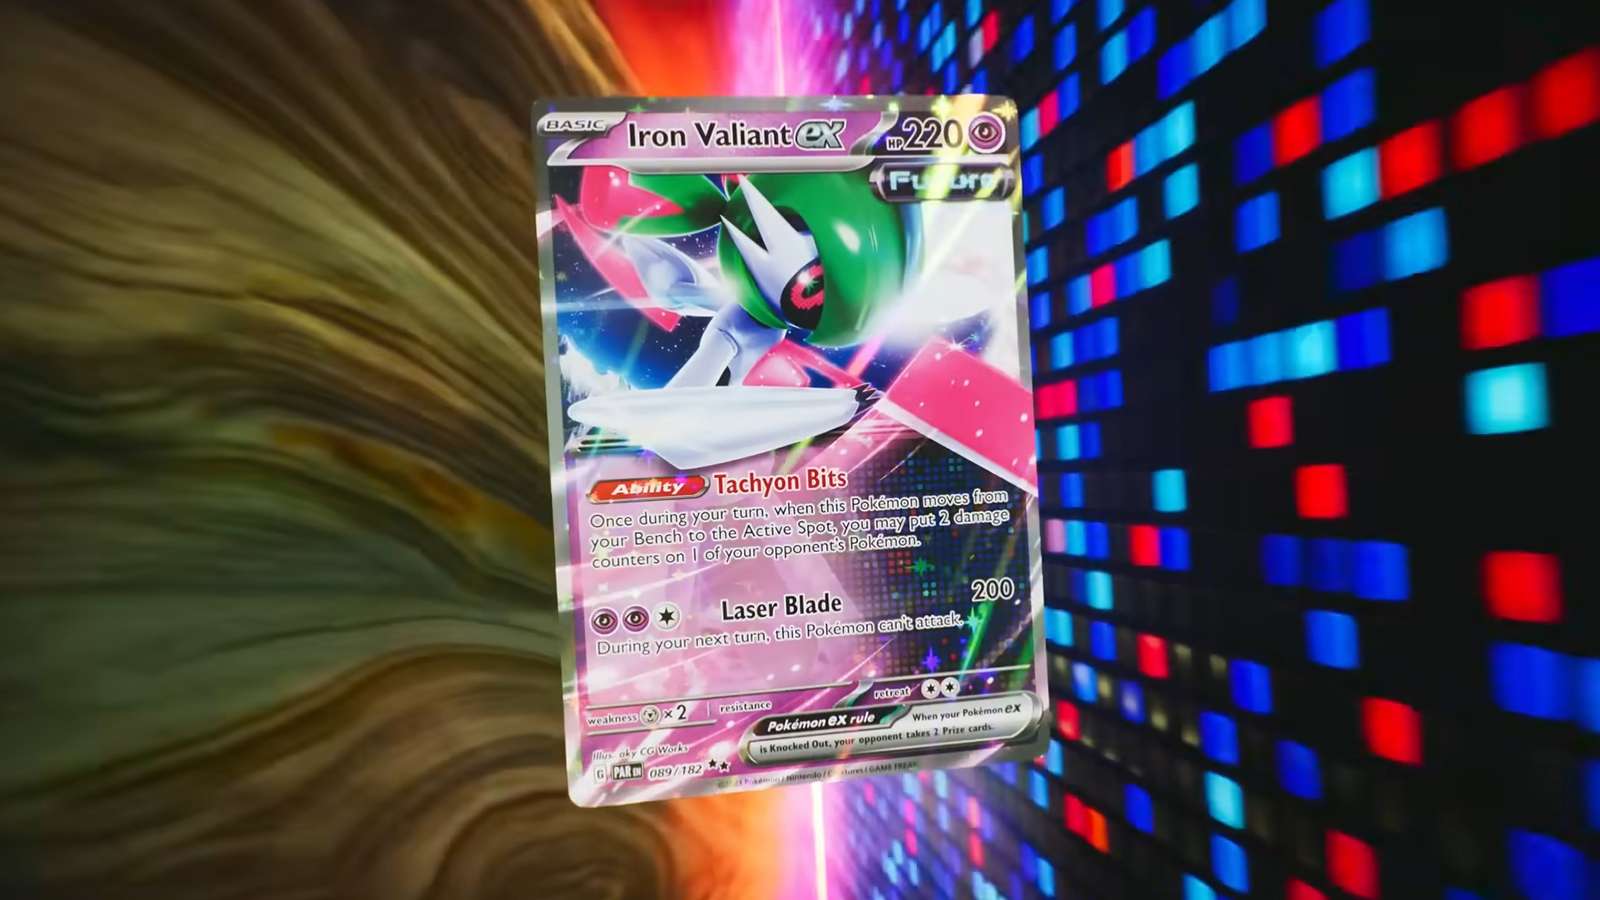 Iron Valiant appearing in the Pokemon TCG Paradox Rift expansion